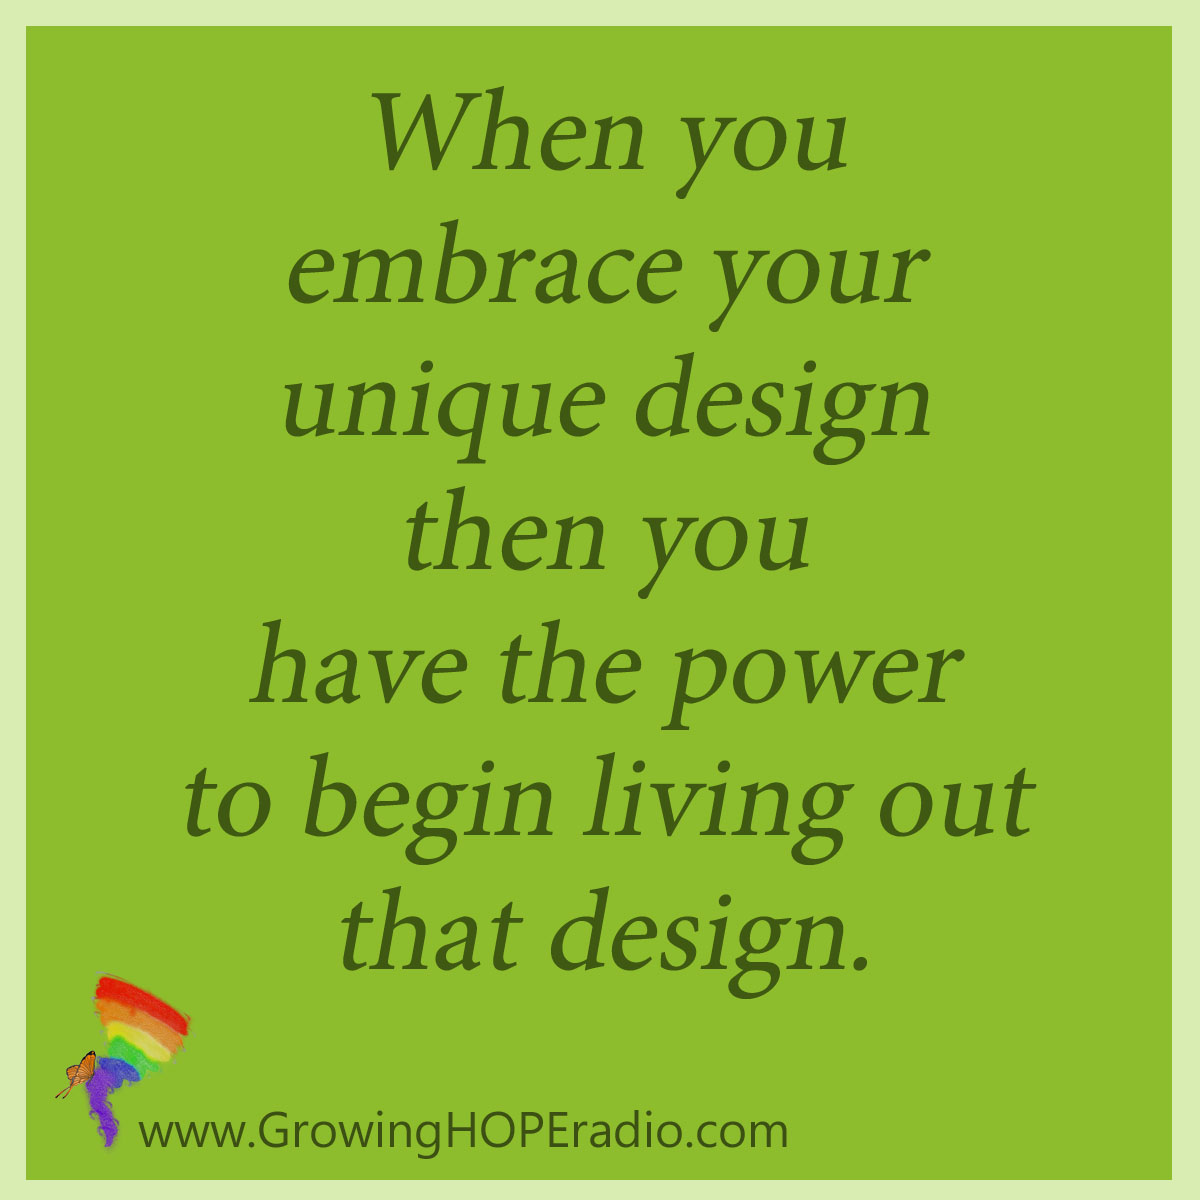 Growing HOPE Daily - quote - embrace your design